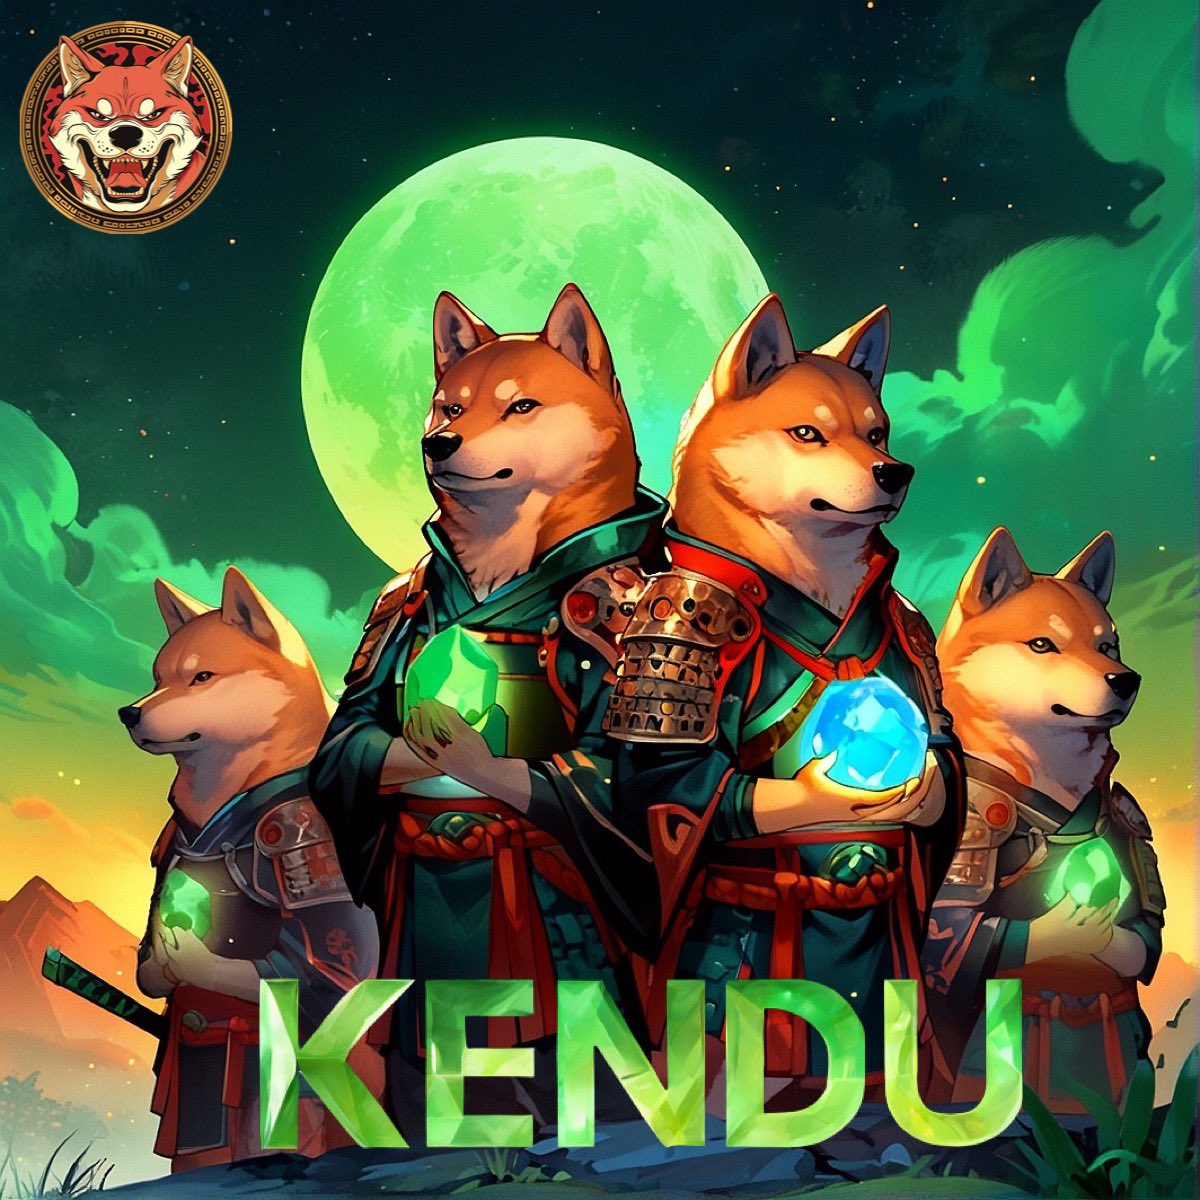 @kaigemchaser $KENDU CHADS HOLD STRONG 💪

#TogetherWeRise #Together we #KENDU anything 💪

Come join the pack @KenduInu 🐕

We’ve got your back 💪